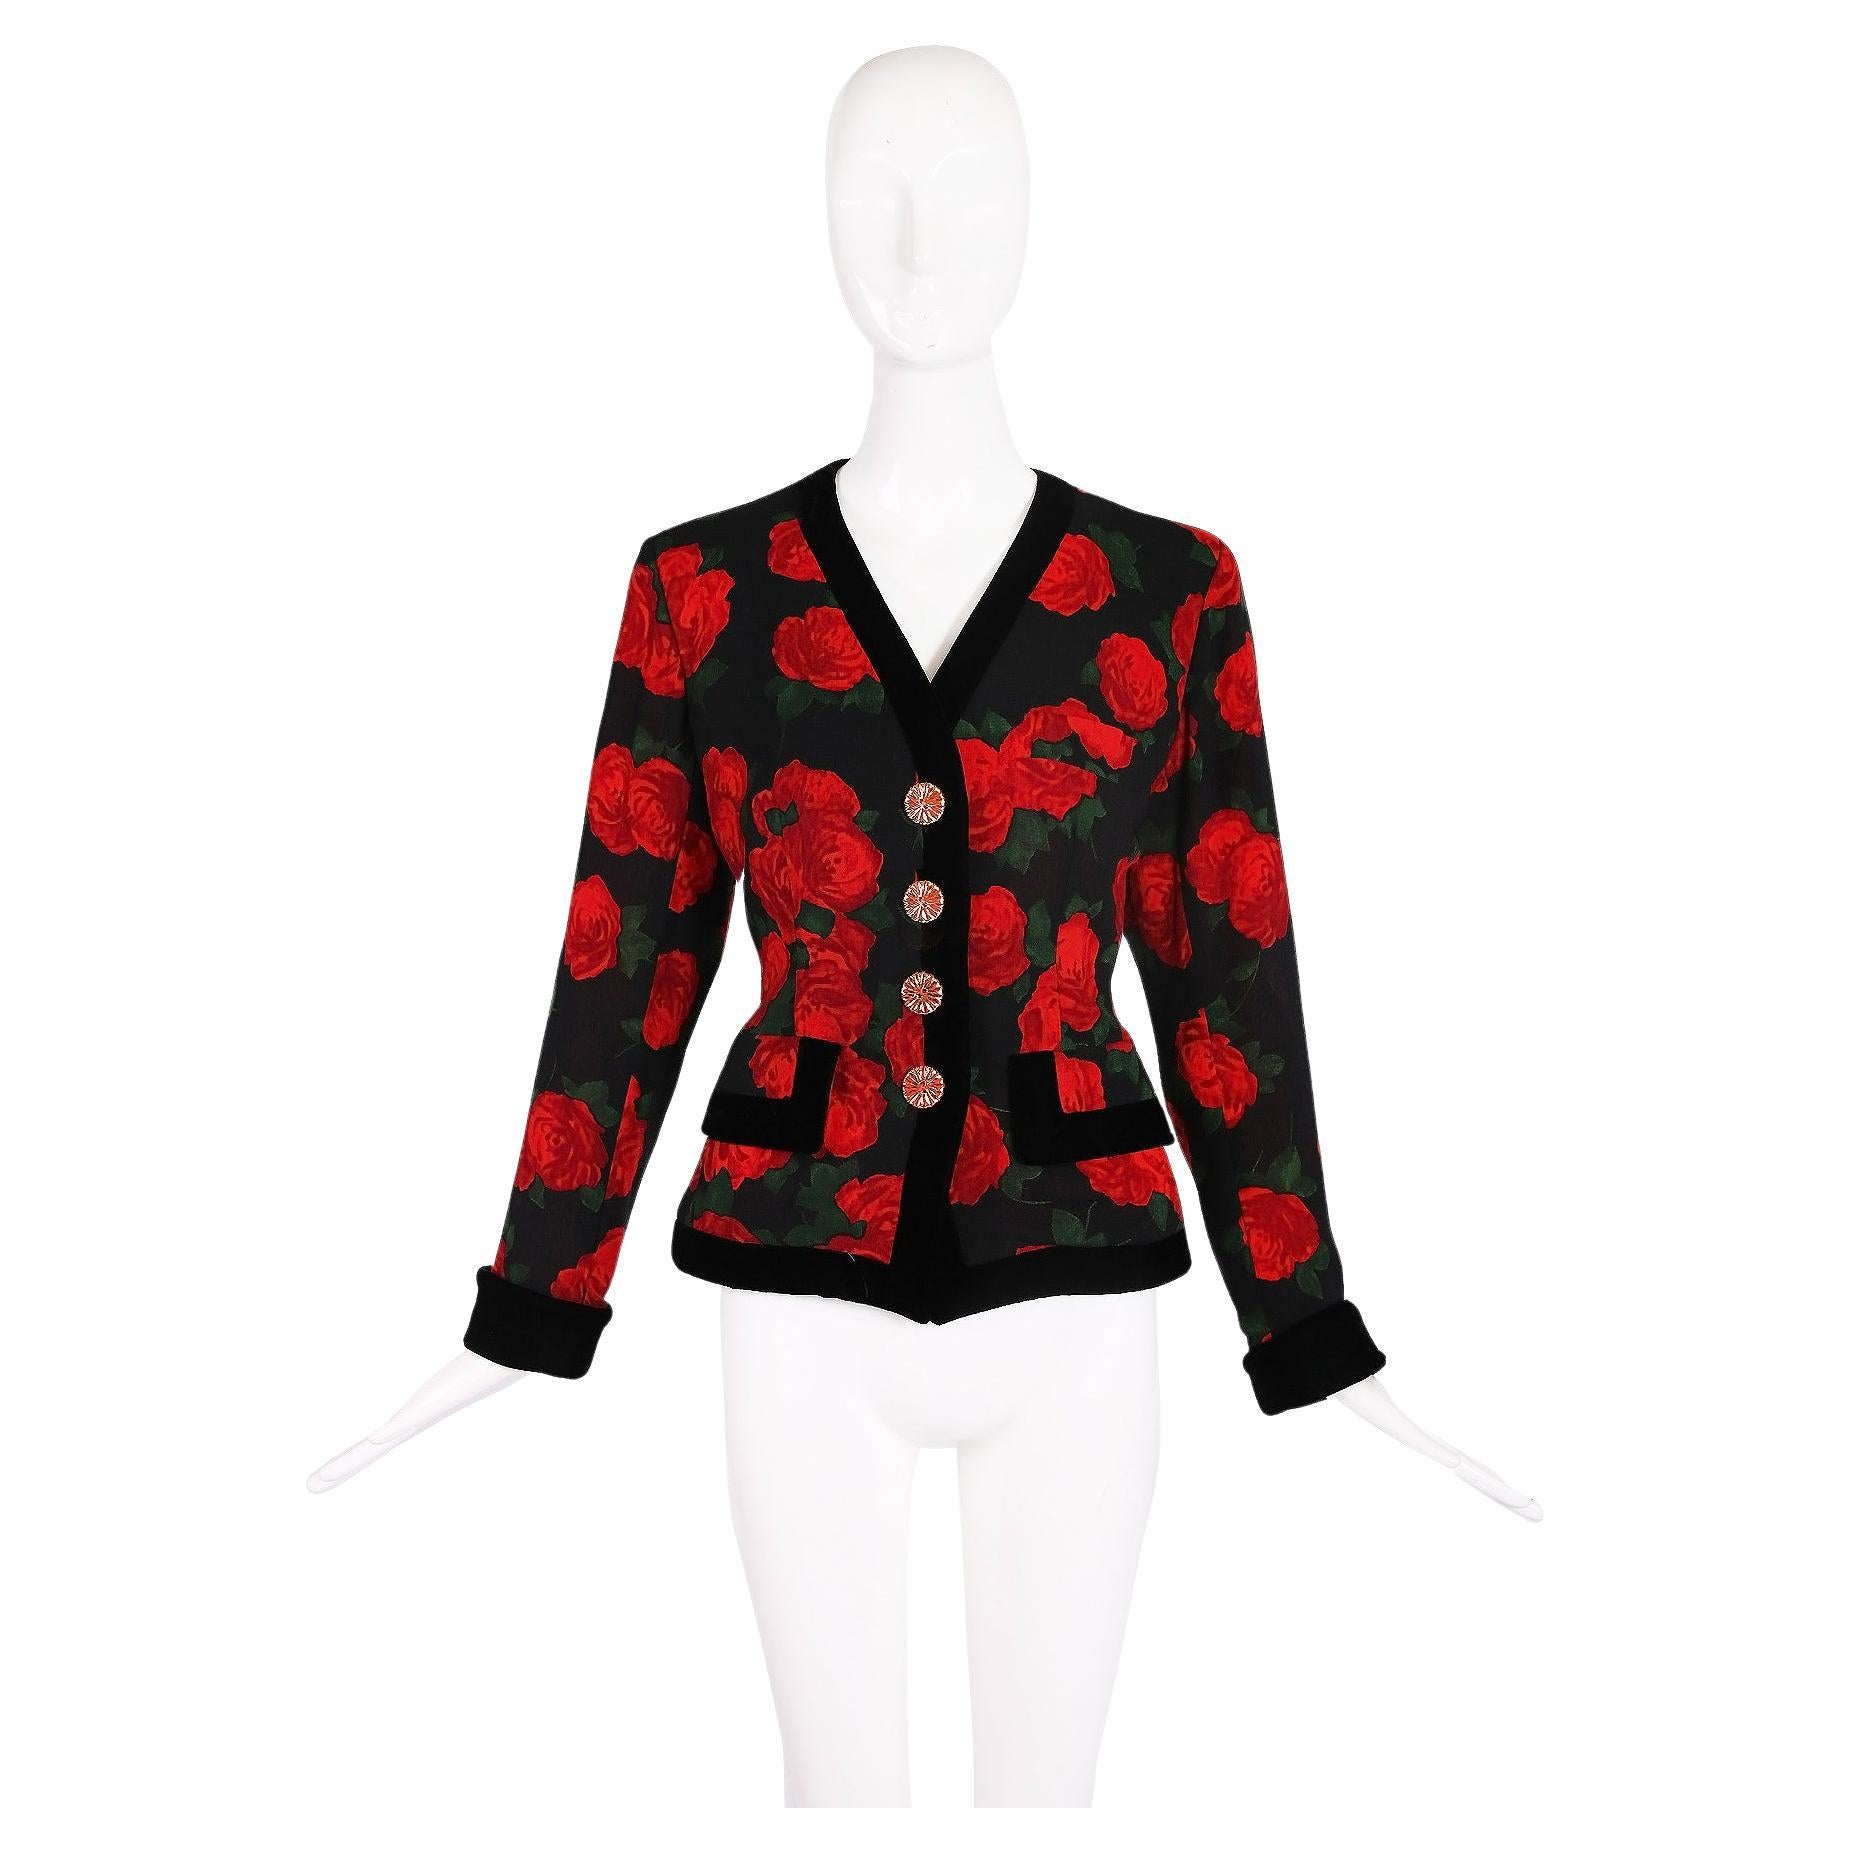 1990's Yves Saint Laurent oversized rose print jacket with two frontal flap pockets, a cinched waist, oversized textured gold and orange buttons and black velvet trim. Fabric tag 100% wool, 100% acetate at interior lining. In excellent condition -